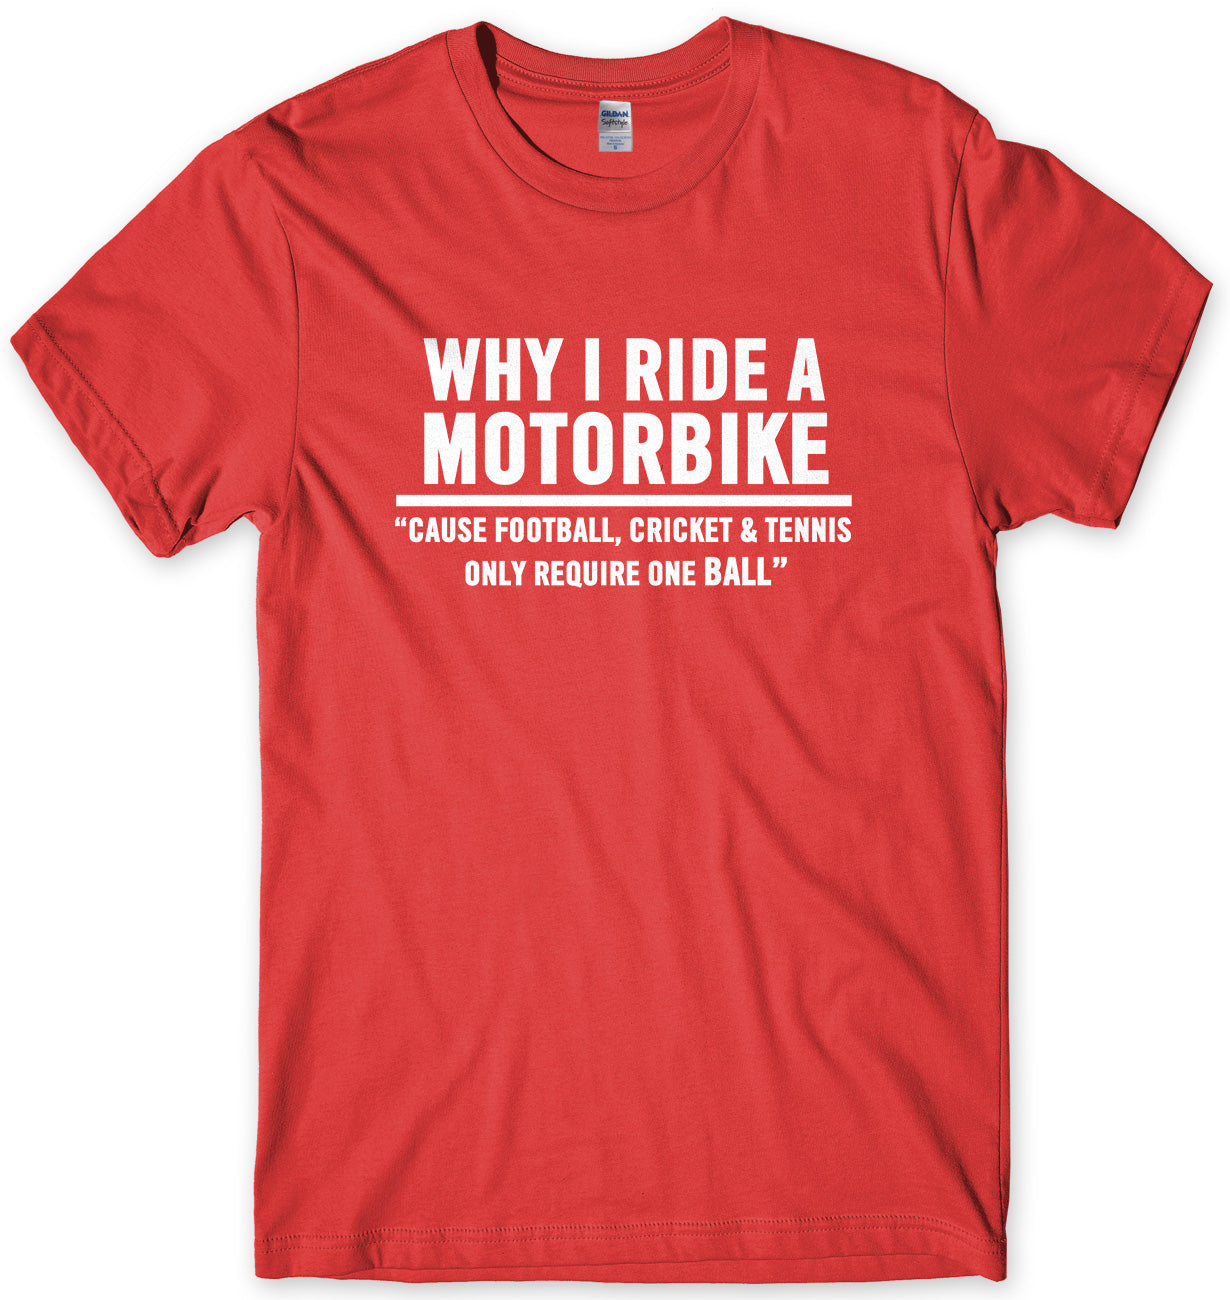 Why I Ride A Motorbike, Cause Football, Cricket And Tennis Only Require One Ball Mens Unisex T-Shirt